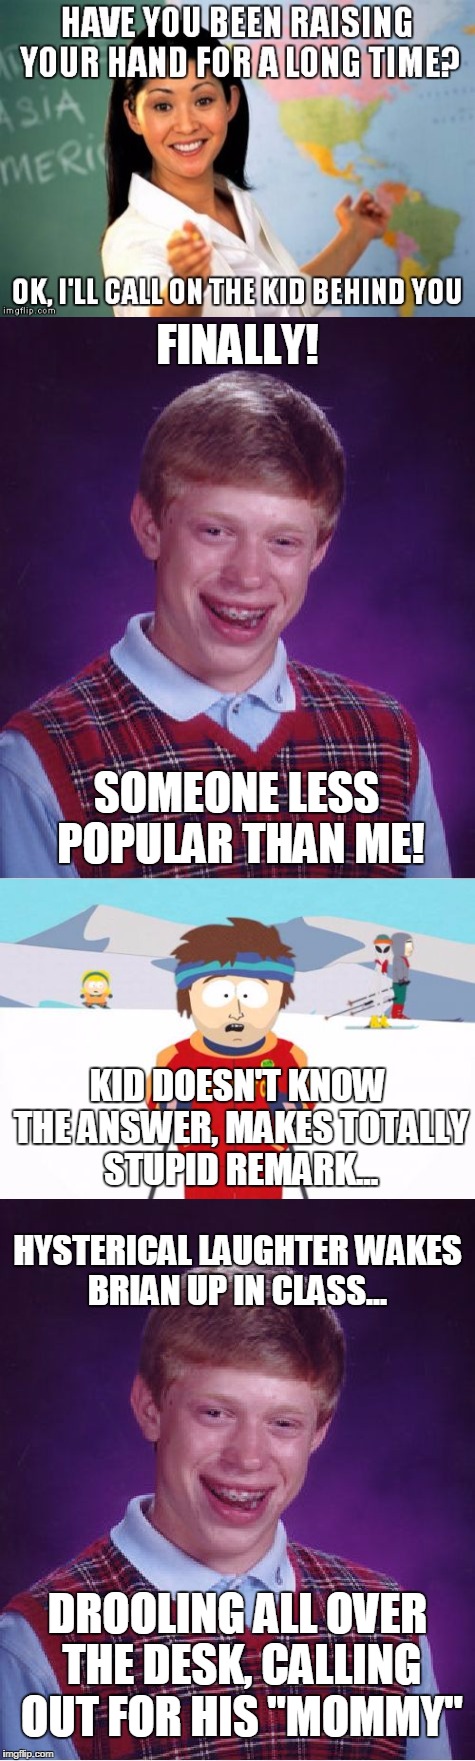 Bad luck brian's dream, reality nightmare | FINALLY! SOMEONE LESS POPULAR THAN ME! KID DOESN'T KNOW THE ANSWER, MAKES TOTALLY STUPID REMARK... HYSTERICAL LAUGHTER WAKES BRIAN UP IN CLASS... DROOLING ALL OVER THE DESK, CALLING OUT FOR HIS "MOMMY" | image tagged in bad luck brian,unhelpful high school teacher,super cool ski instructor,popular,nightmare | made w/ Imgflip meme maker